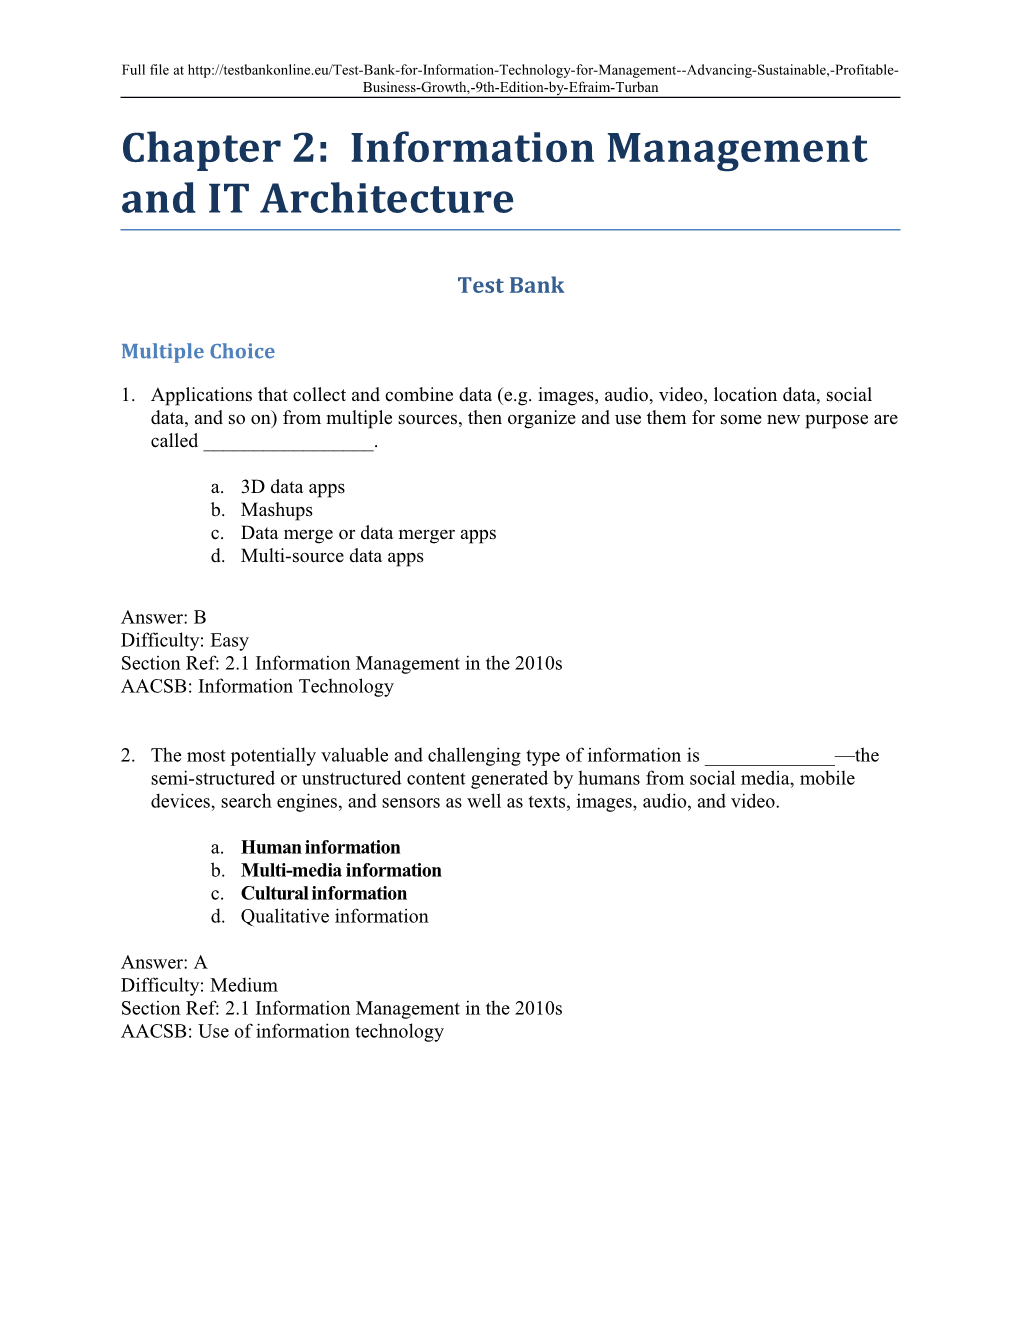 Chapter 2: Information Management and IT Architecture